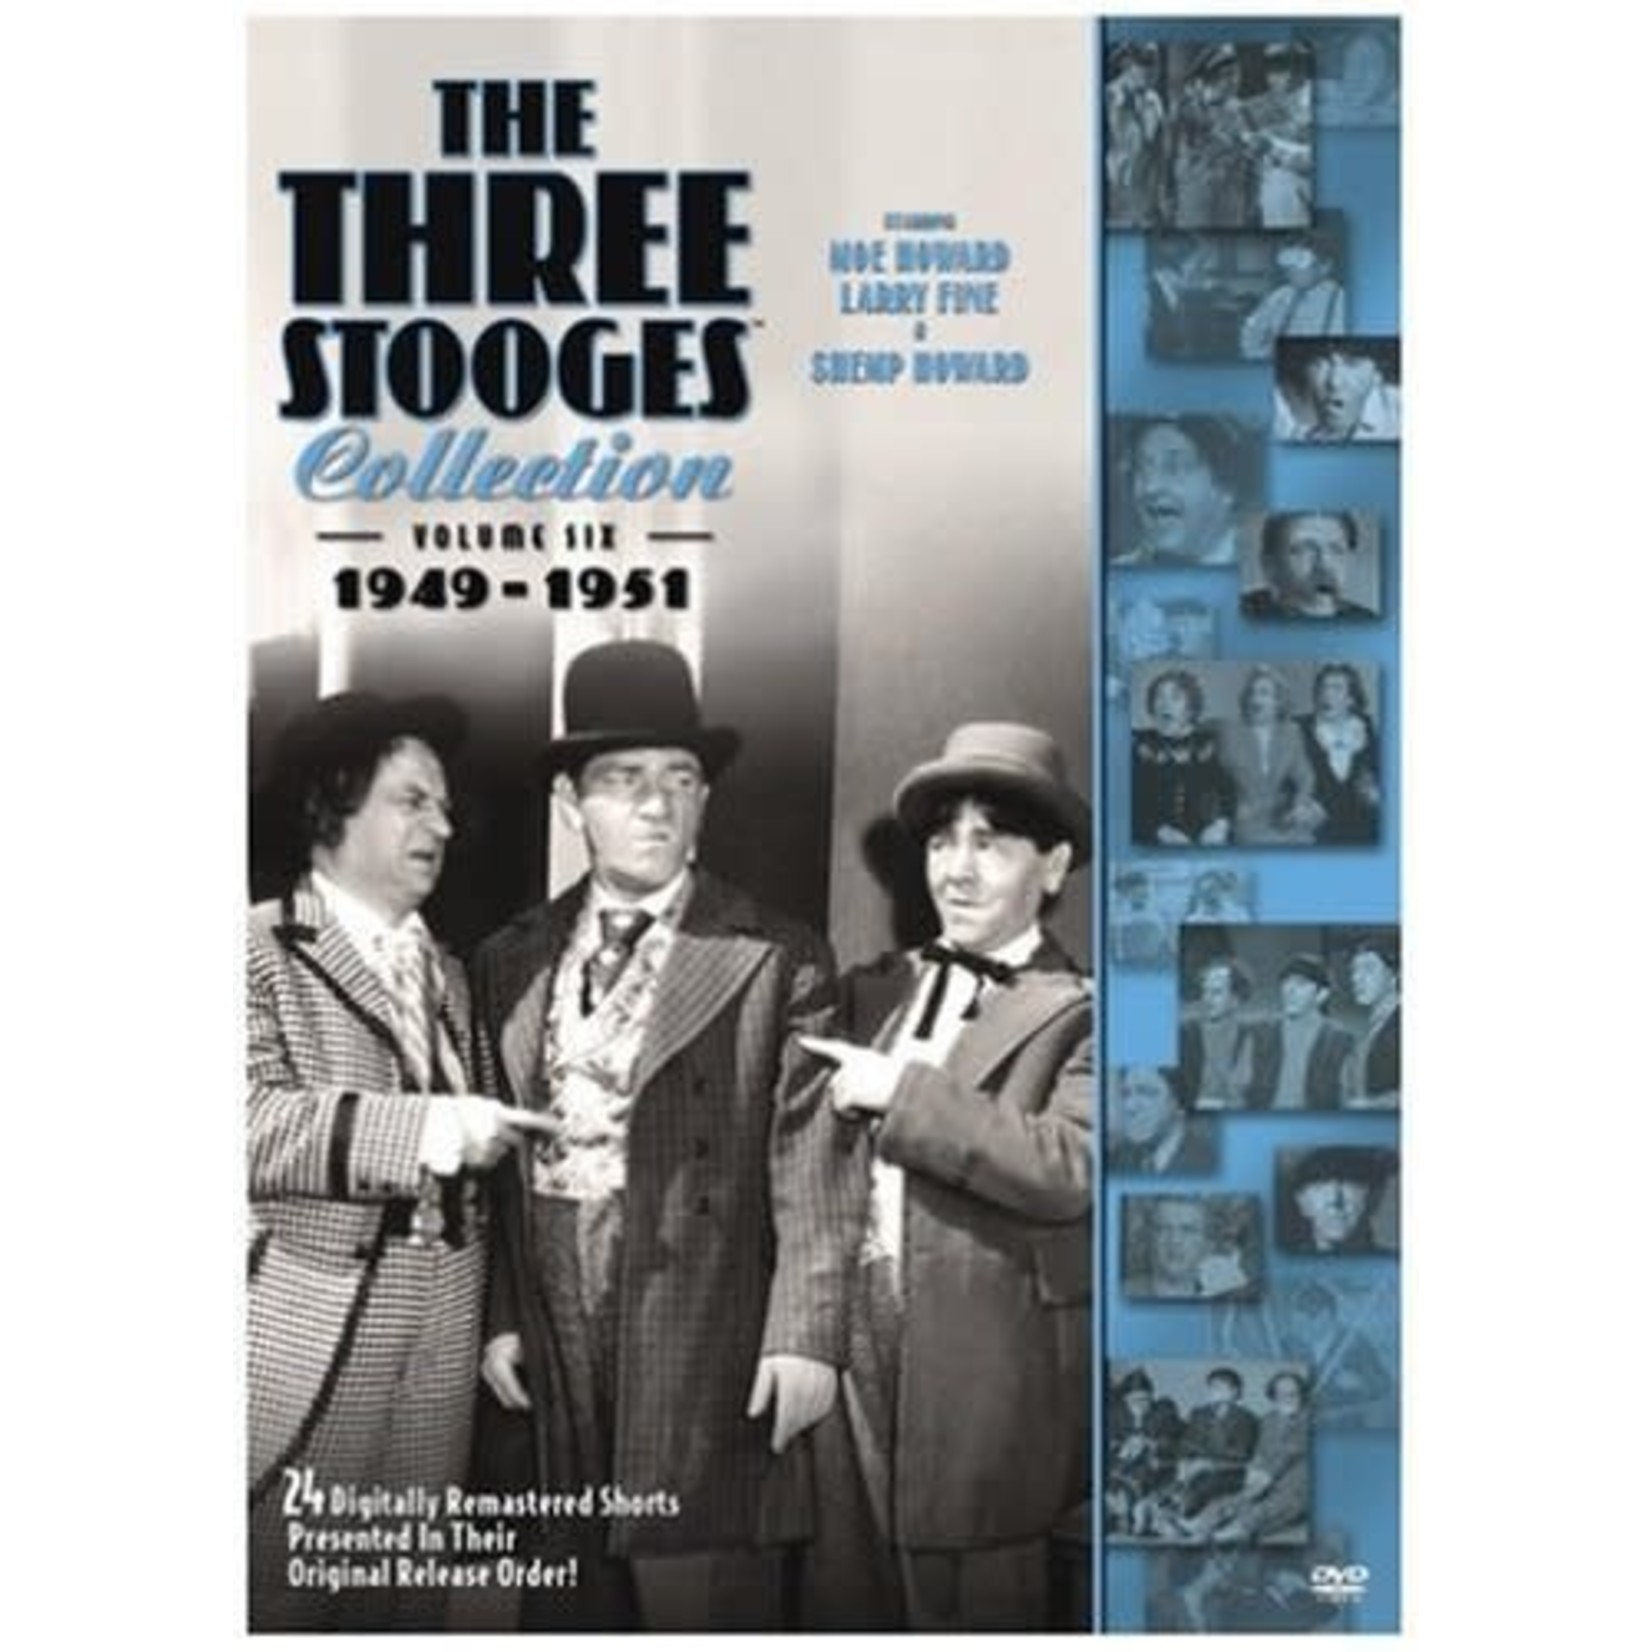 Three Stooges - Collection Vol. 6: 1949-1951 [USED DVD]